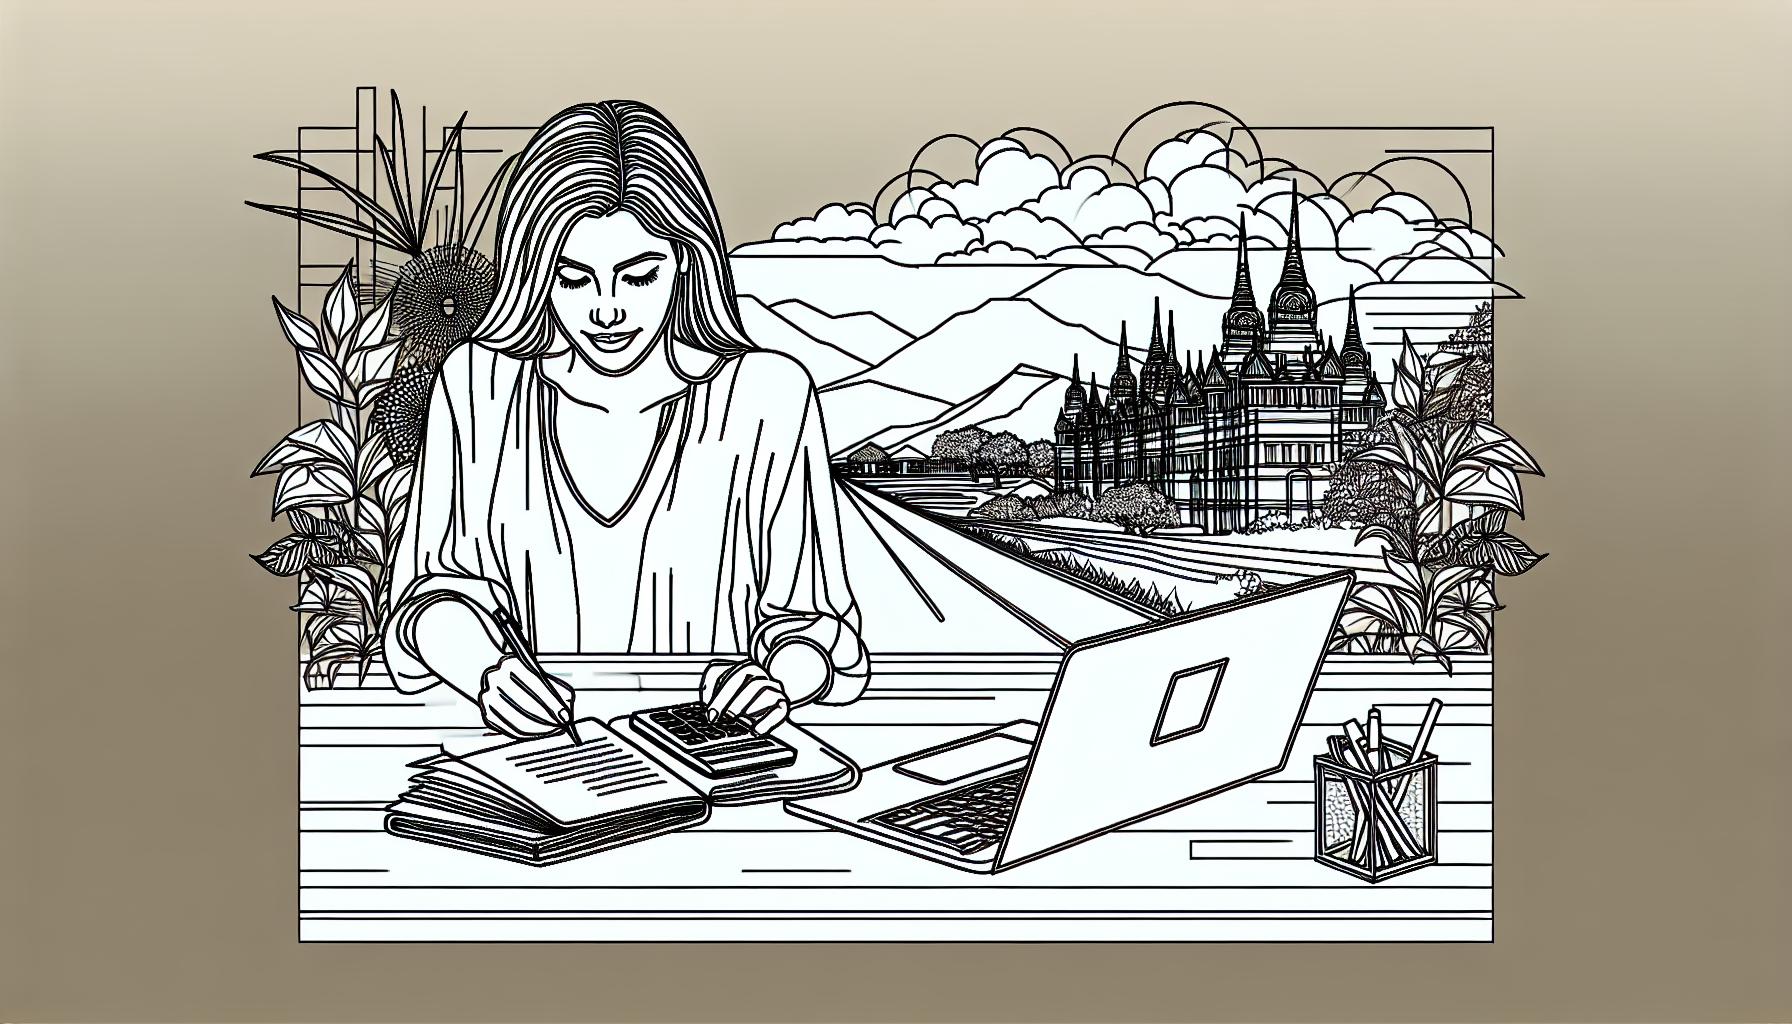 Lifestyle Mastering Your Digital Nomad Budget - Tips for Saving Money ReallyRemoteWorker Discover practical tips to budget effectively as a digital nomad. This article provides insightful strategies including choosing cost-efficient destinations, home-cooking, public transportation use, and moderating entertainment costs. Learn to enjoy digital nomad freedom while maintaining financial discipline.